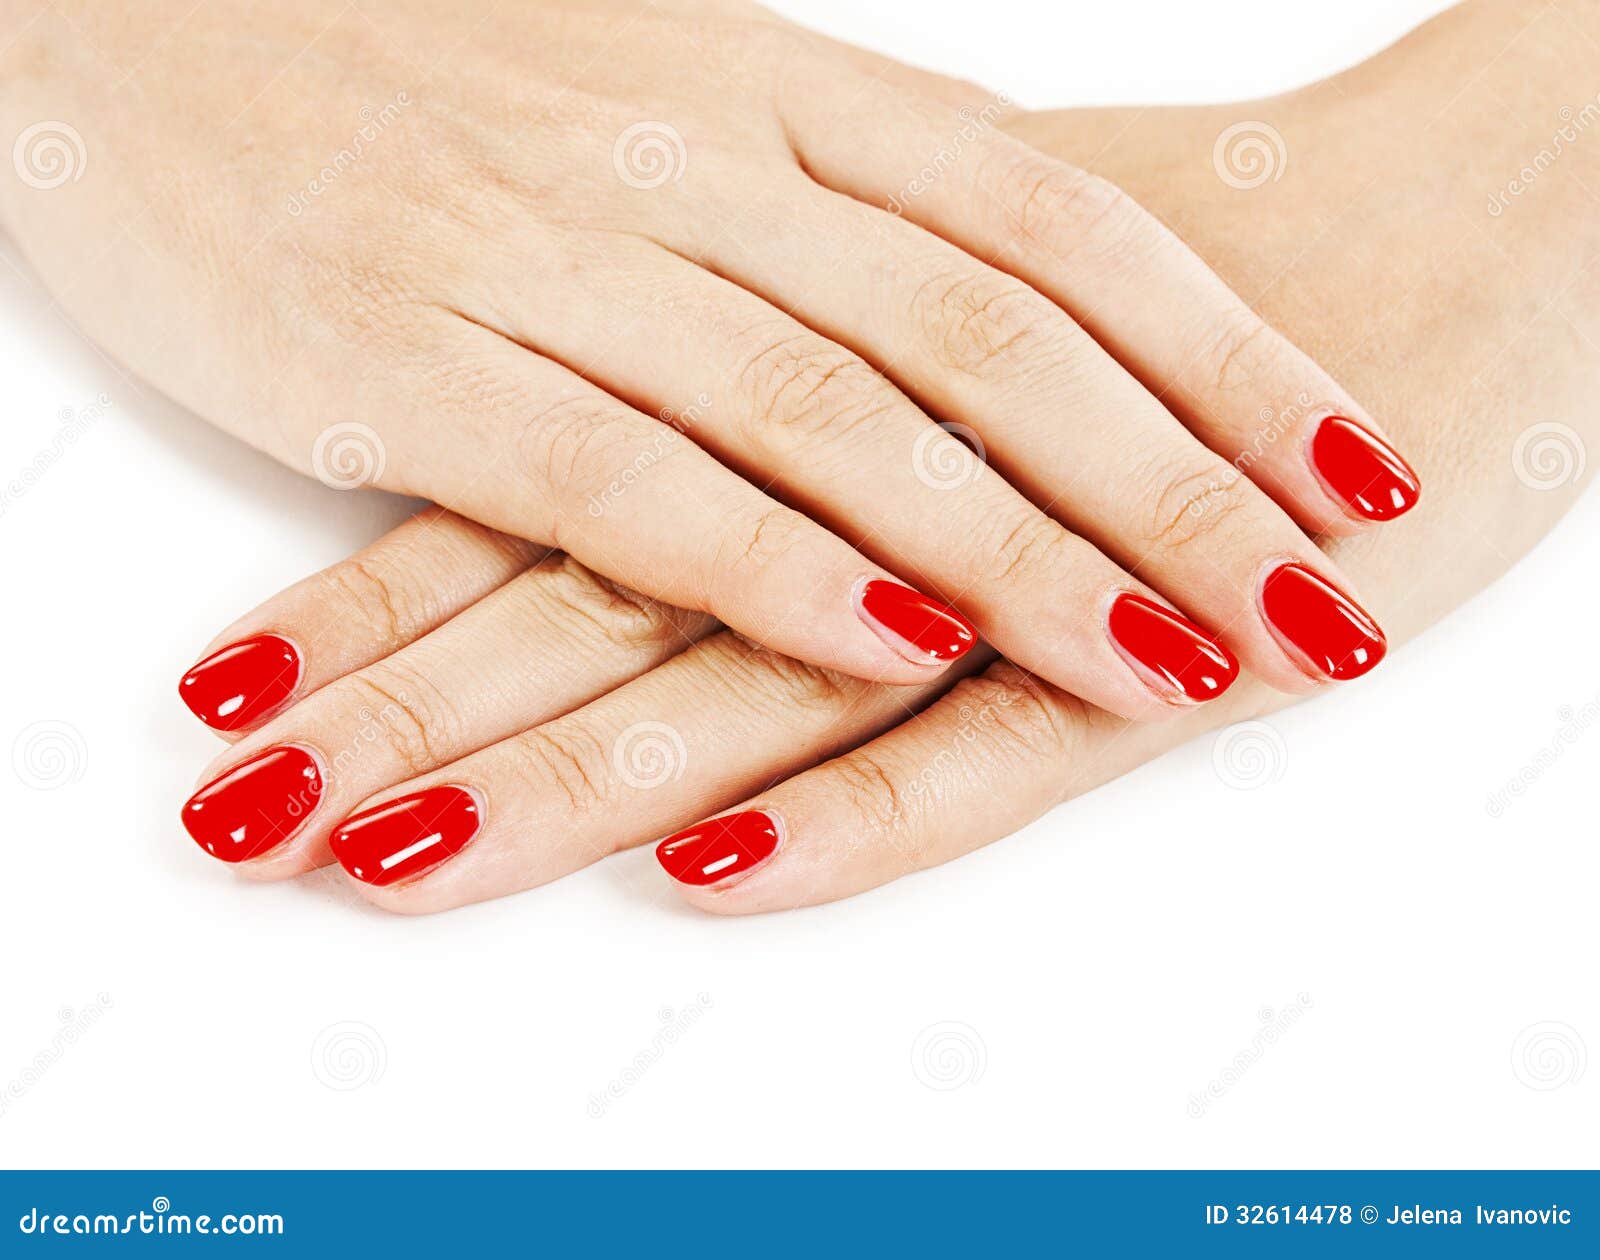 beautiful manicured woman's hands with red nail polish